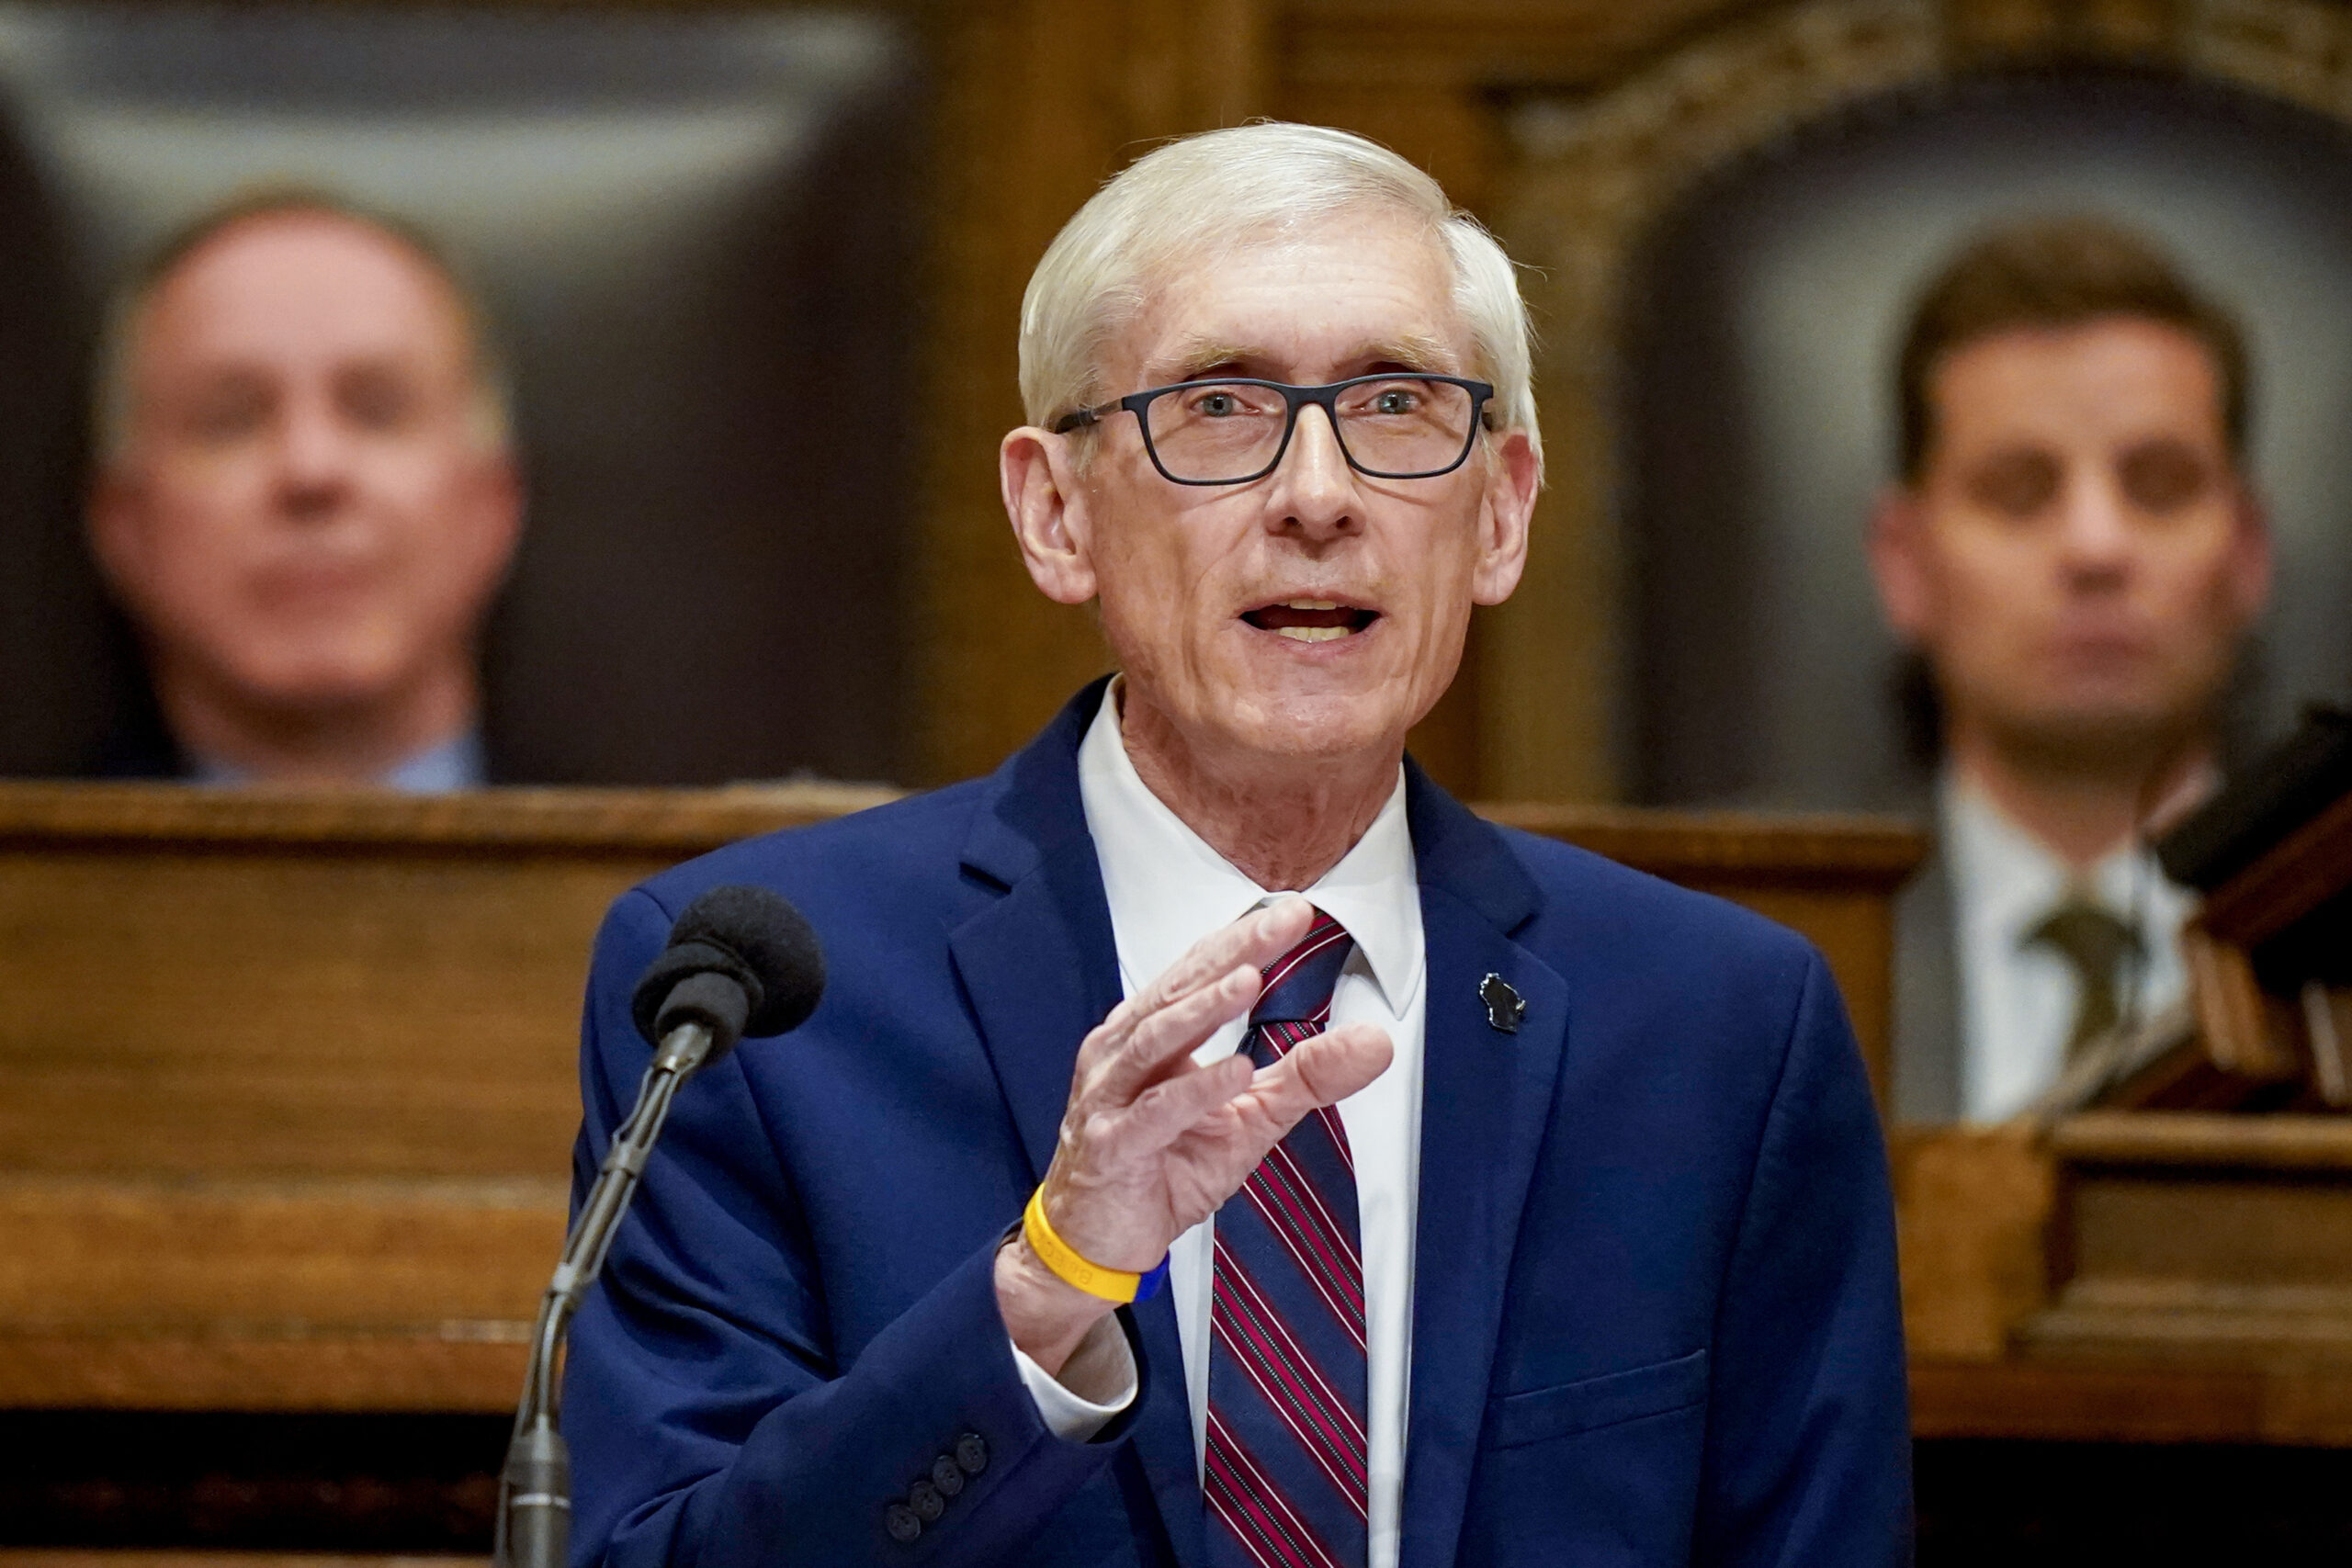 Gov. Tony Evers addresses a joint session of the Legislature in the Assembly chambers during the governor's State of the State speech